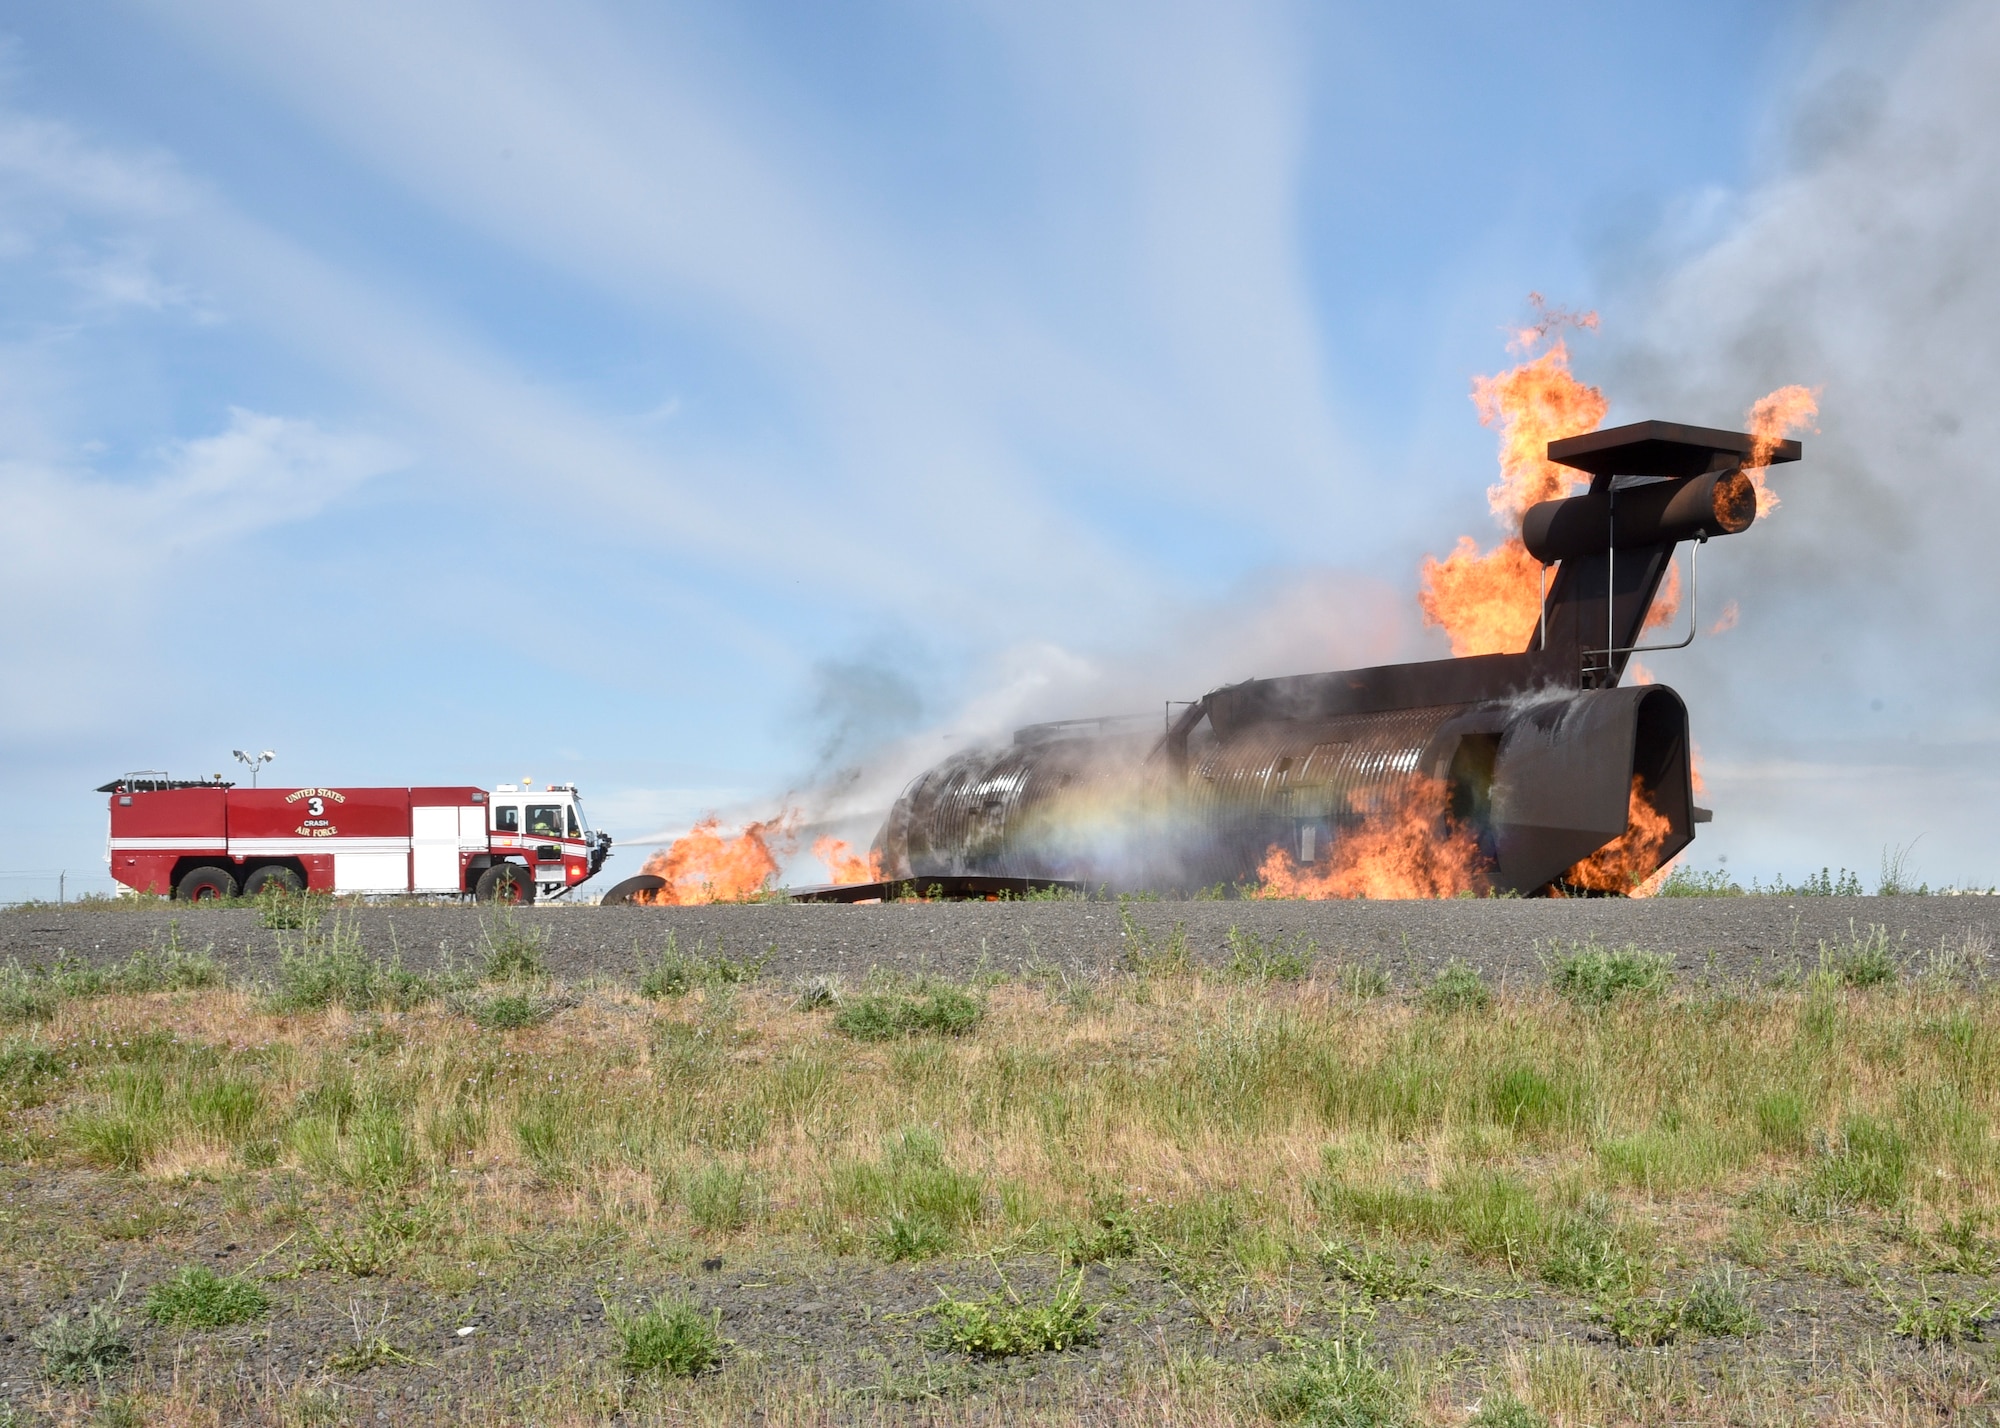 92nd Civil Engineer Squadron firefighters work to put out flames during a simulated aircraft incident May 11, 2016, at Fairchild Air Force Base, Wash. The training involved various 92nd CES agencies including members from the Fire Department, Emergency Management, Environmental and Explosive Ordinance Disposal; working together to resolve the incident. (U.S. Air Force photo/Airman 1st Class Taylor Bourgeous)